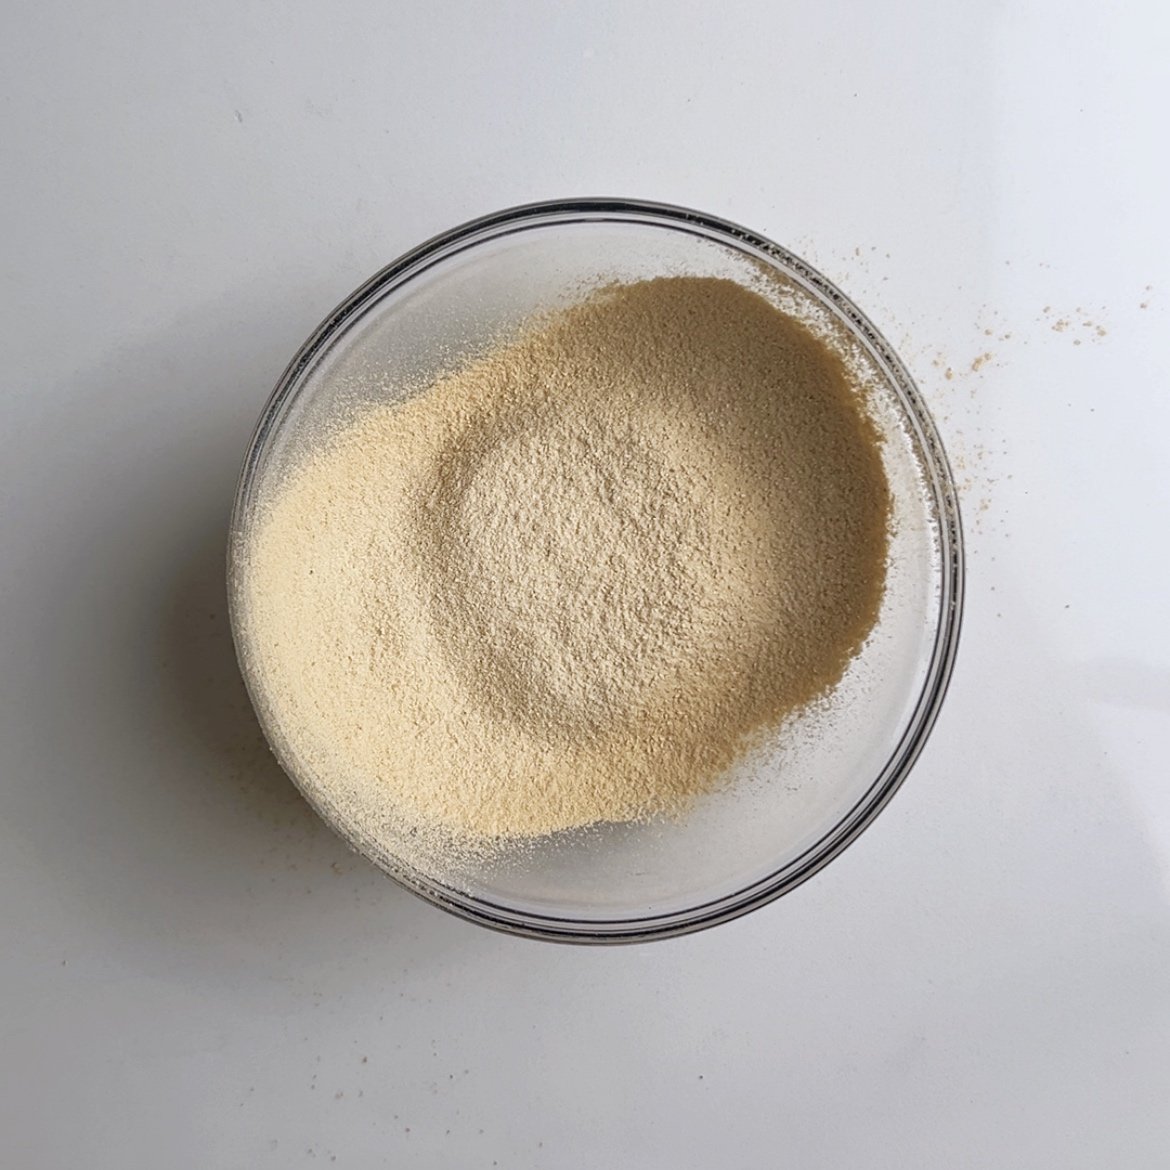 Sifted flour in a glass bowl